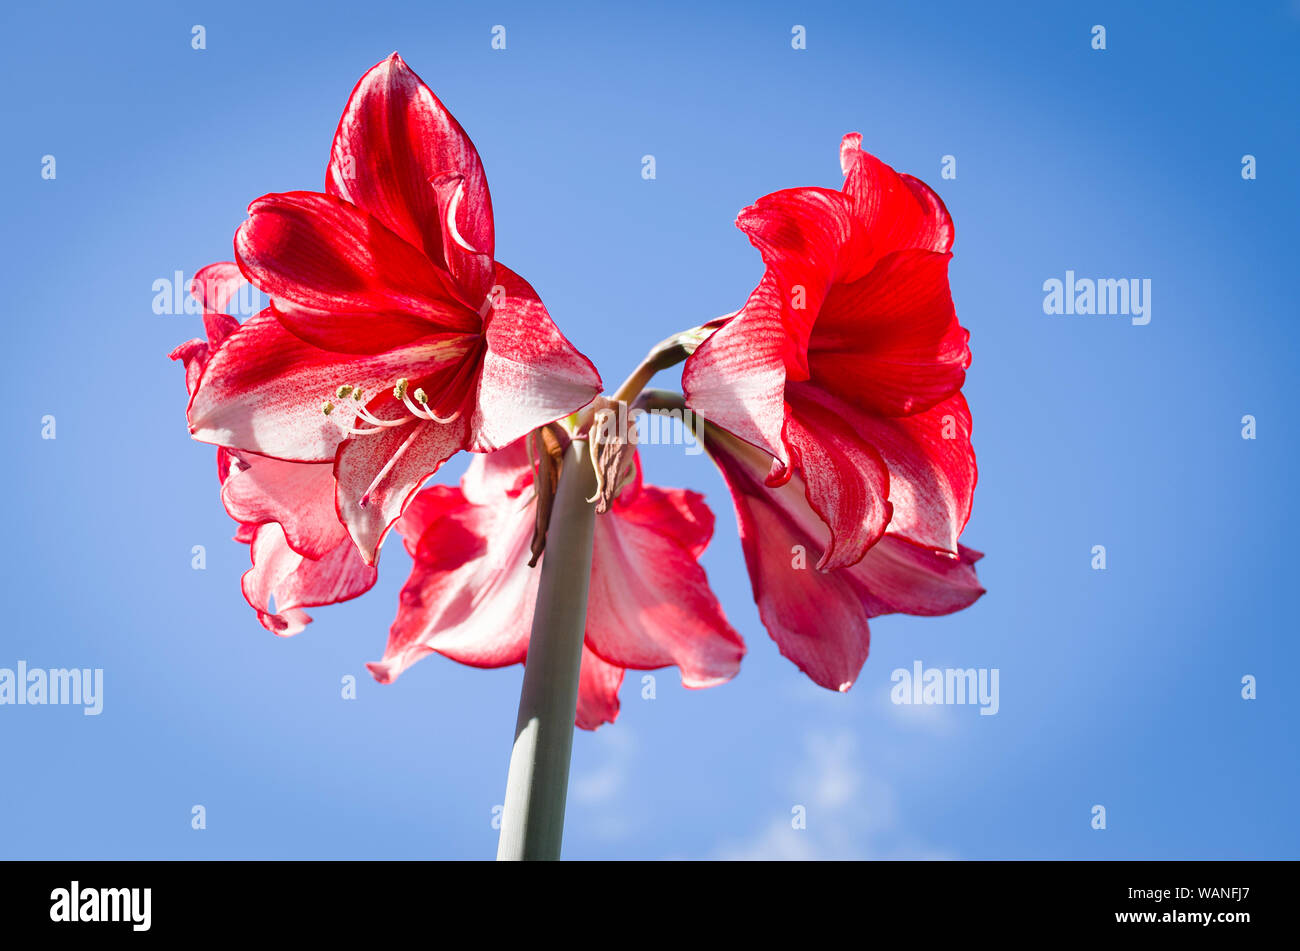 Red and white flowers on a stately Hippeastrum Charisma house-plant grown from a bulb in England UK Stock Photo